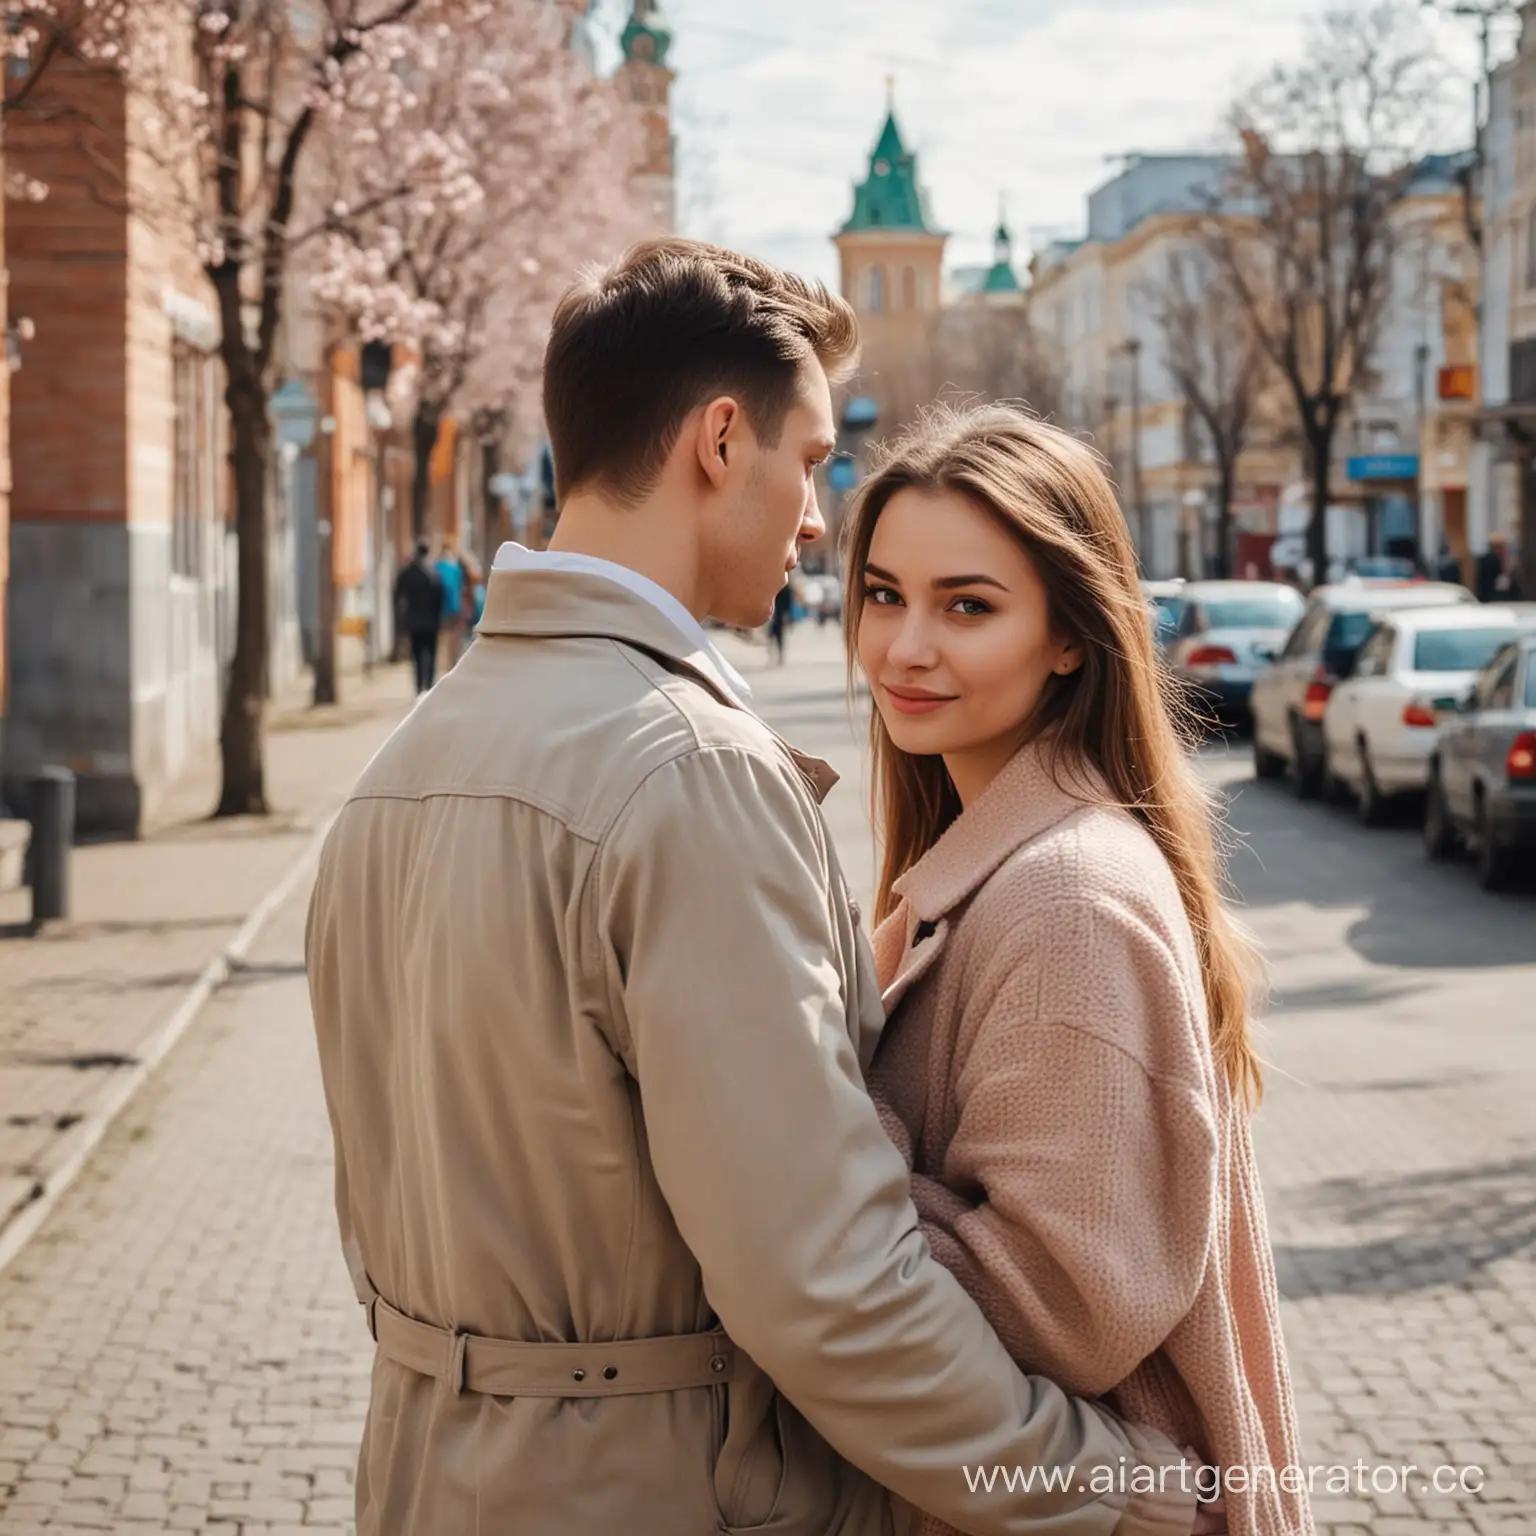 Romantic-Couple-Strolling-Through-Historic-Russian-City-Streets-in-Spring